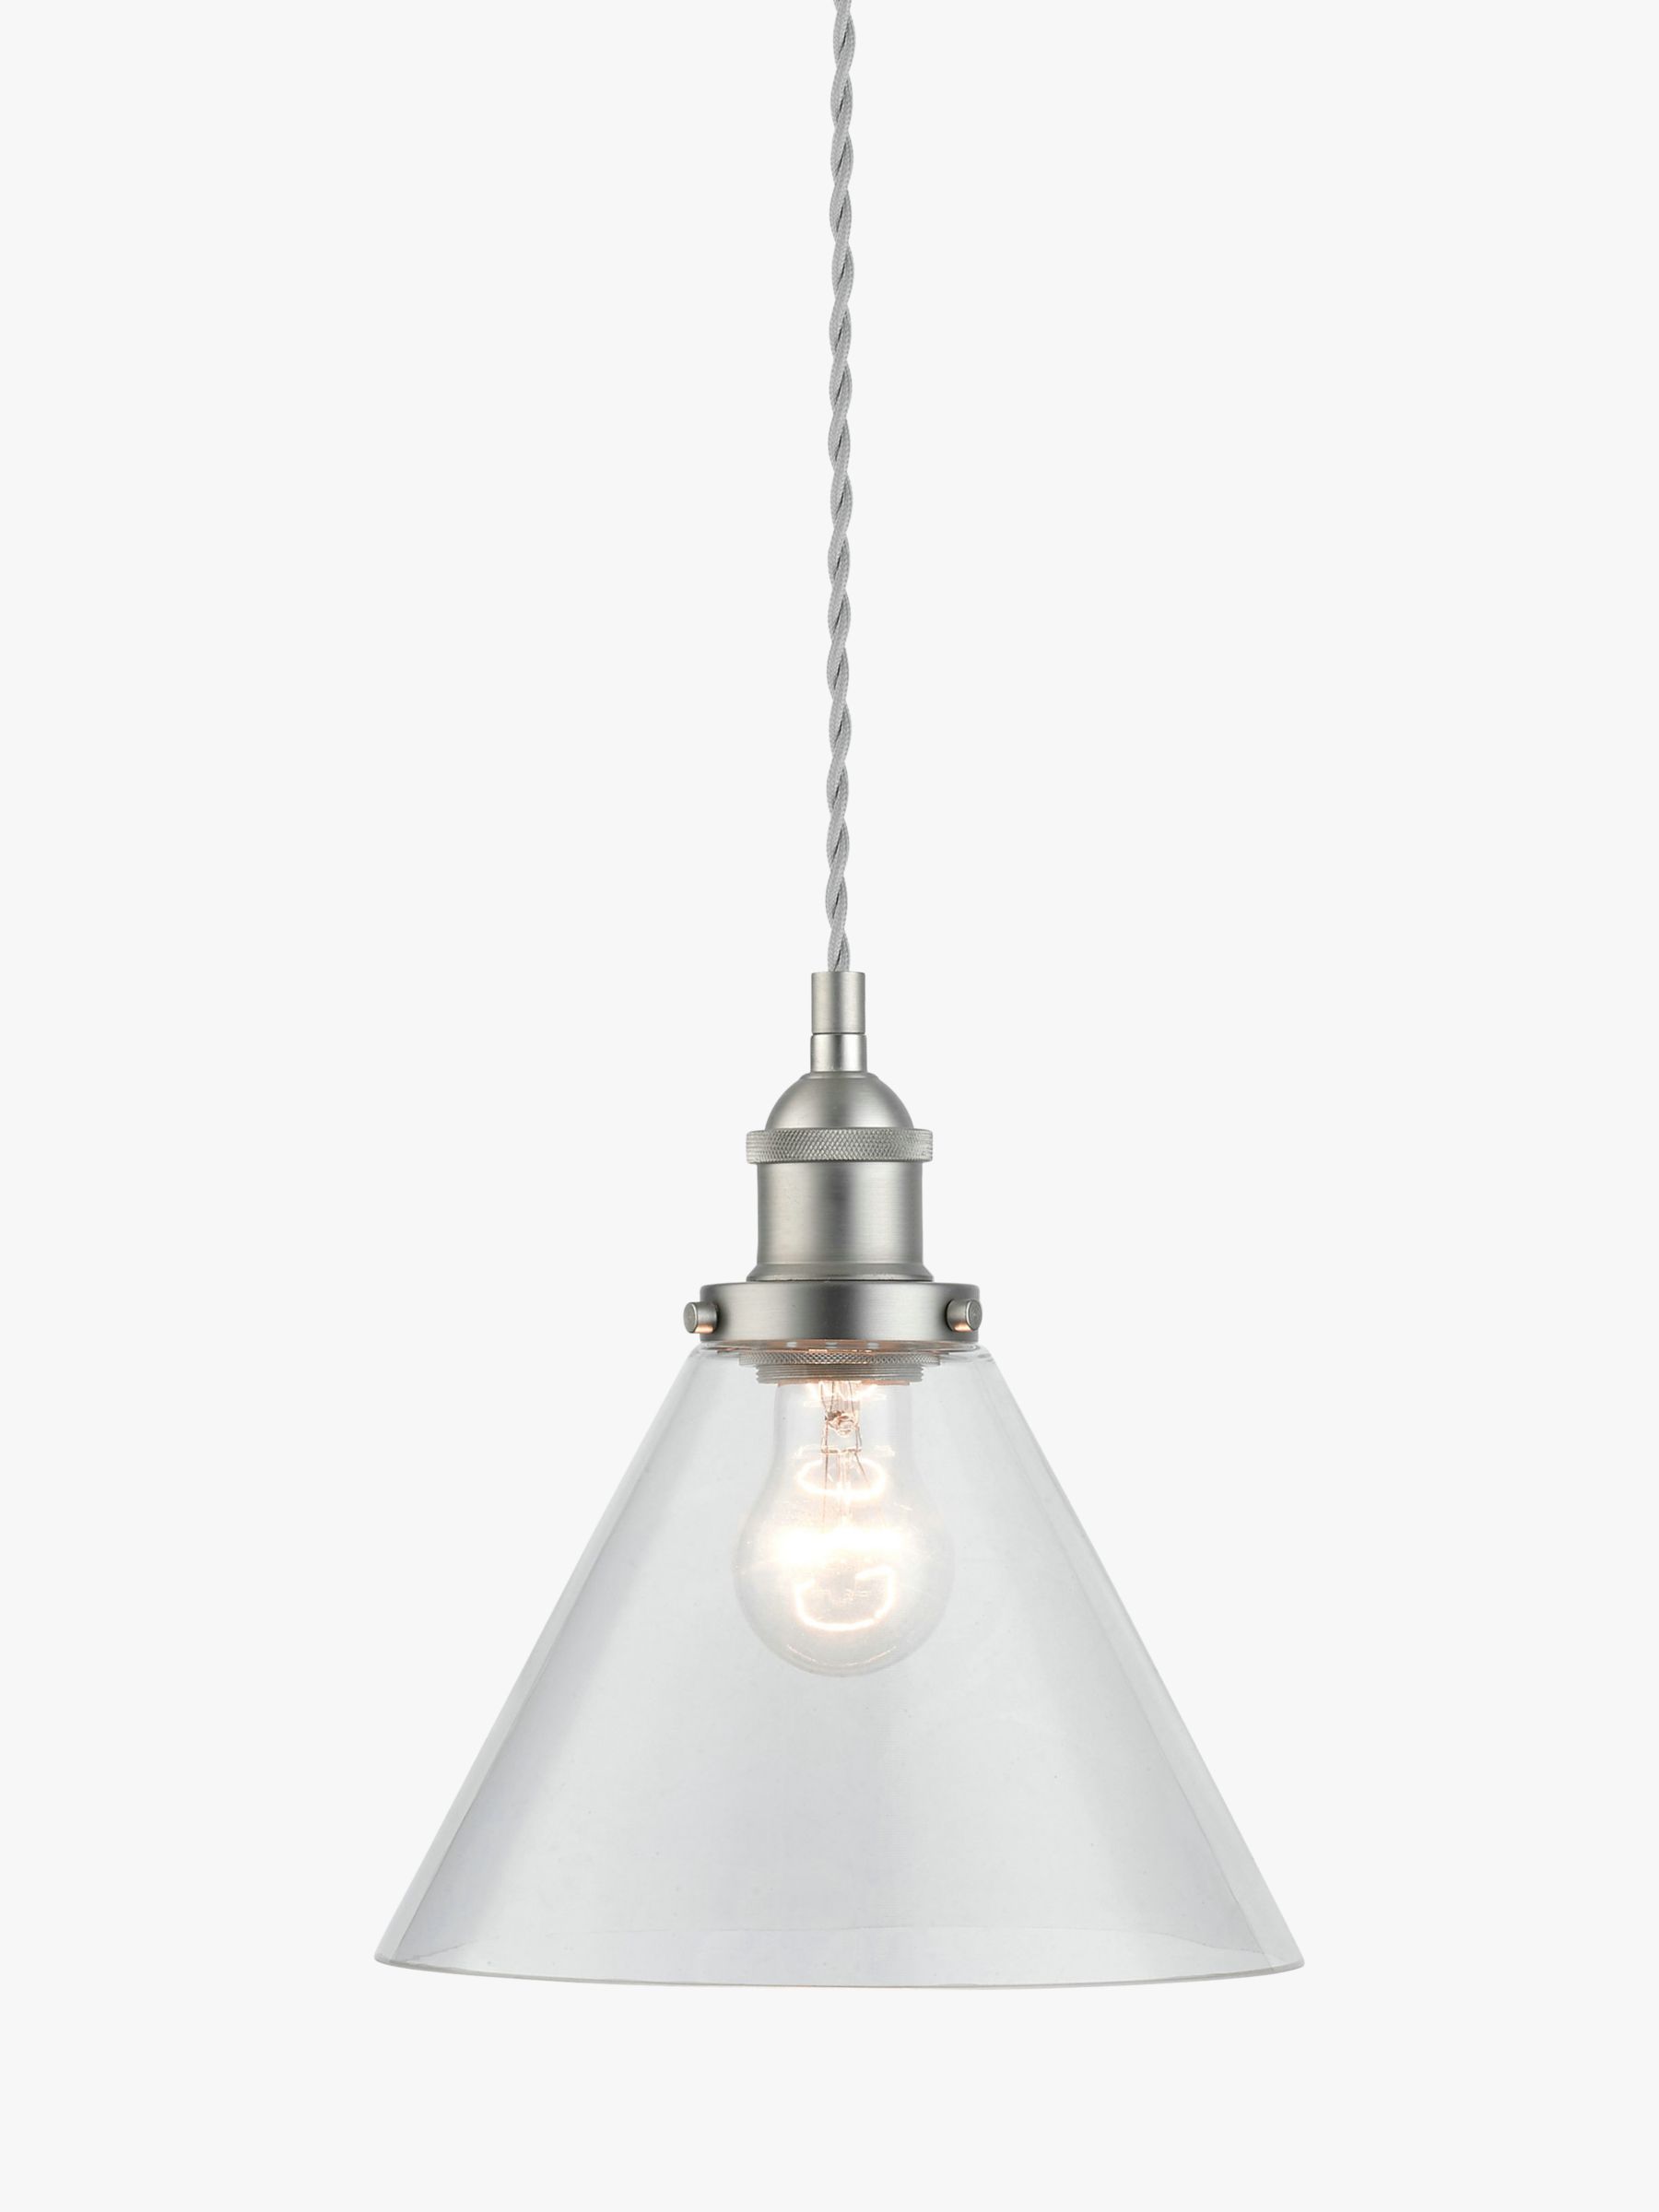 Photo of John lewis glass cone ceiling light clear/pewter